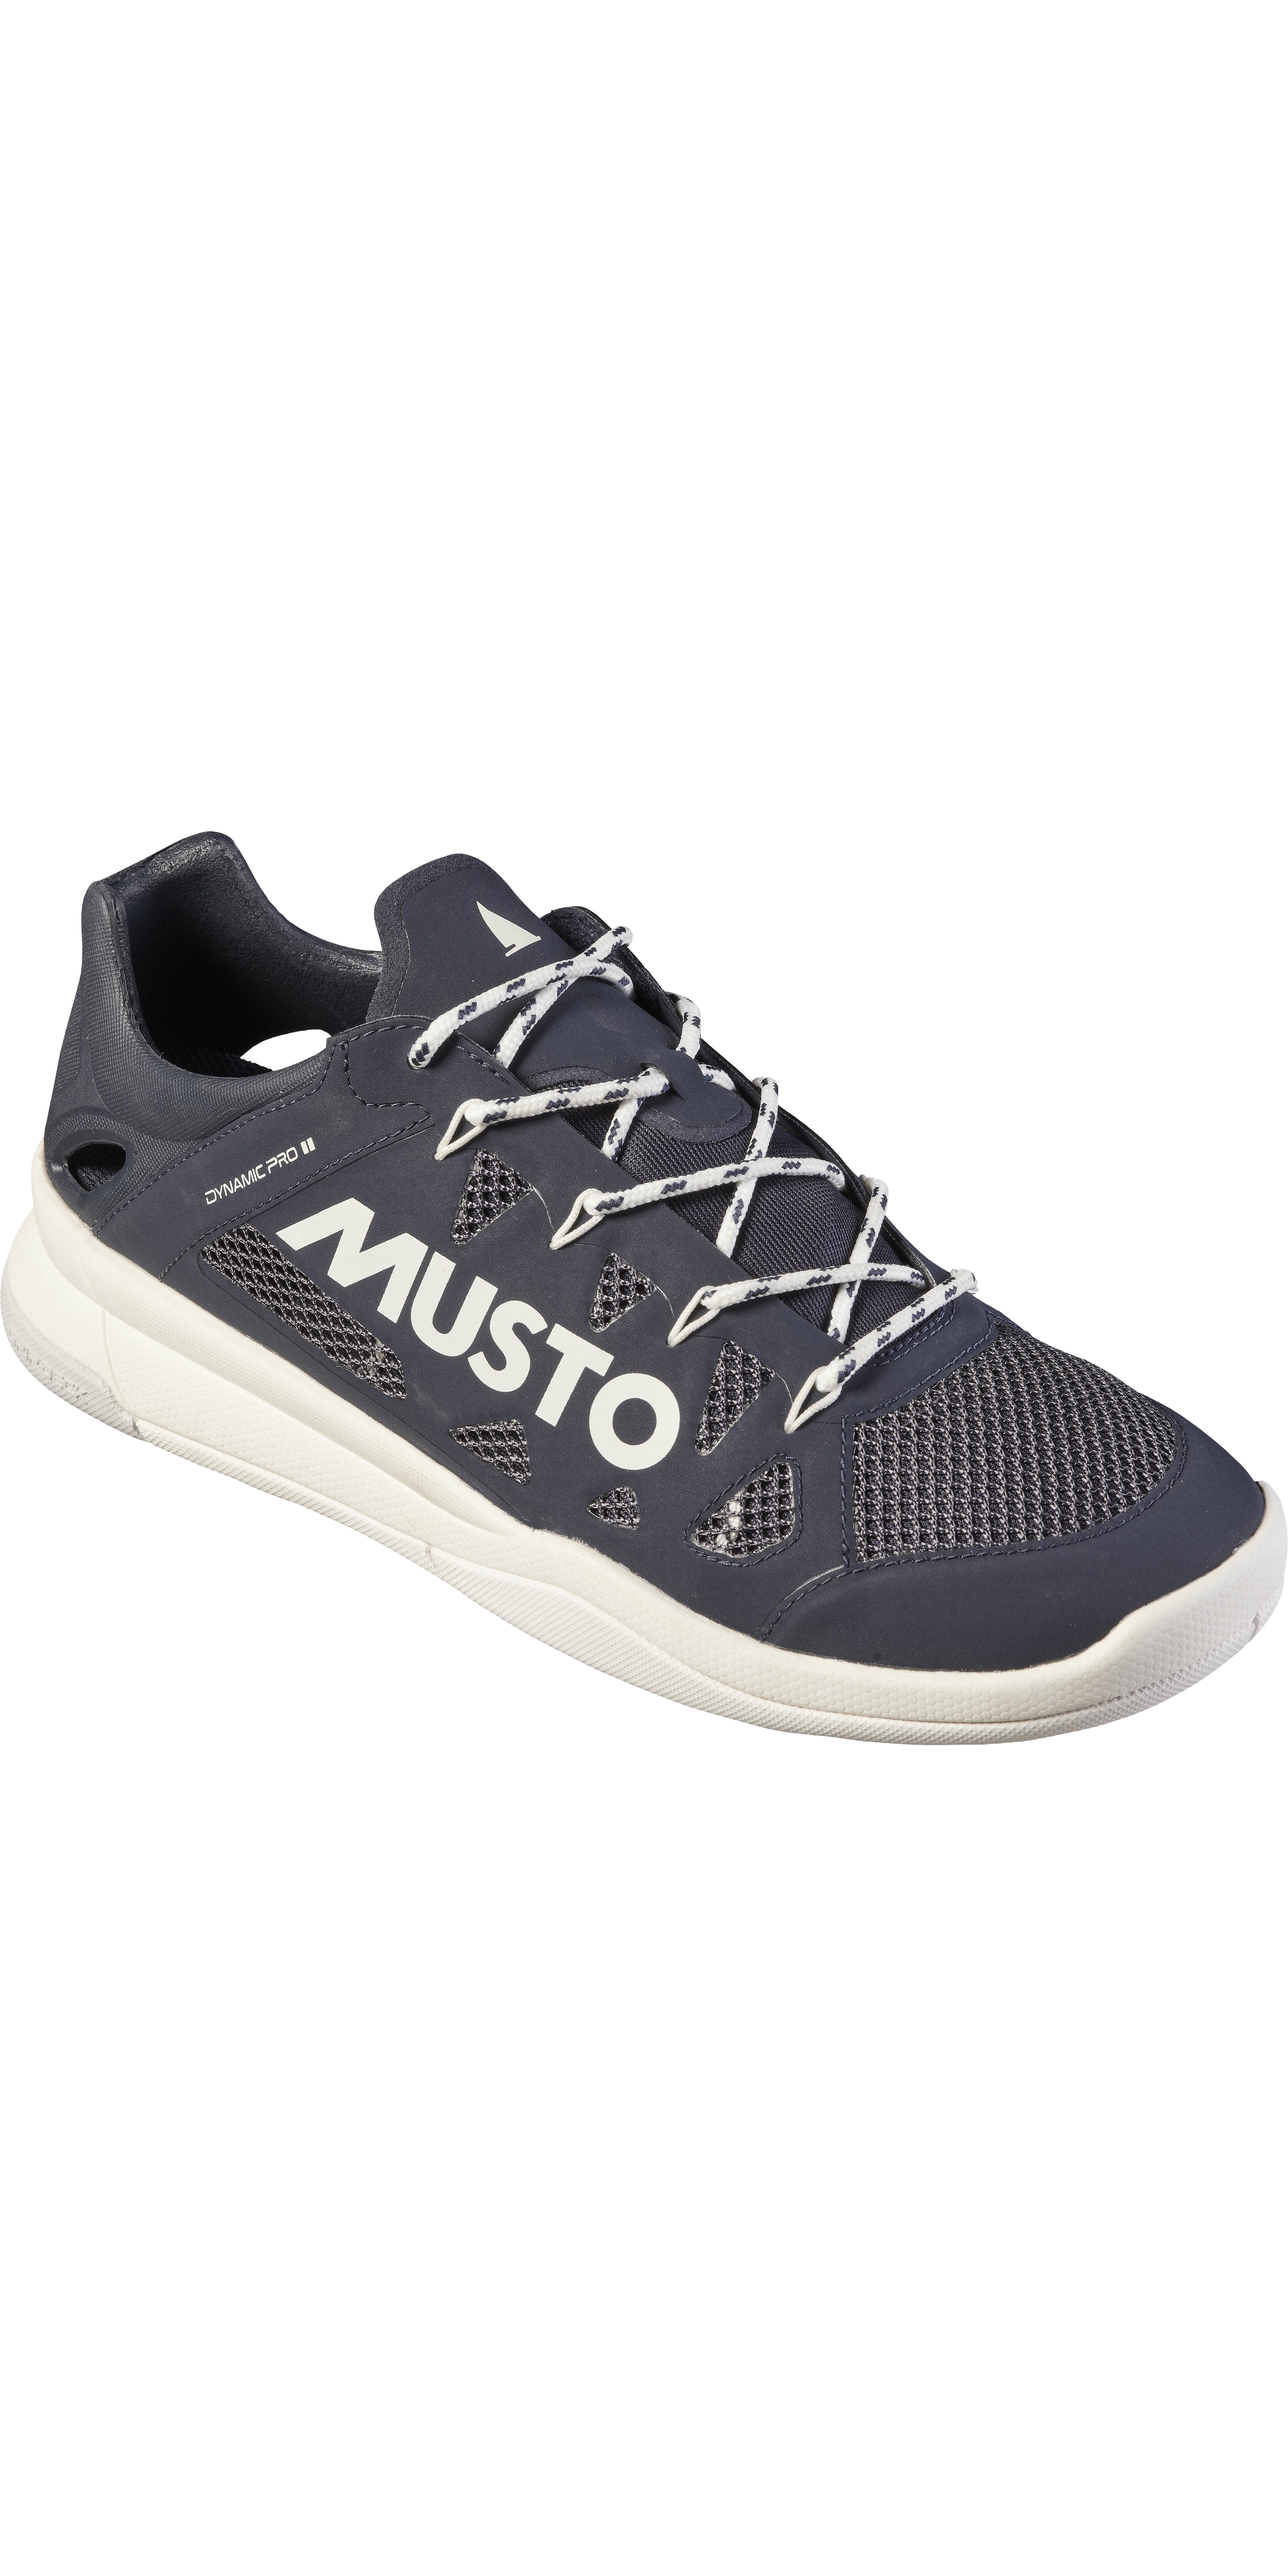 2023 Musto Mens Dynamic Pro II Sailing Shoes 82026 - True Navy / White -  Sailing | Wetsuit Outlet